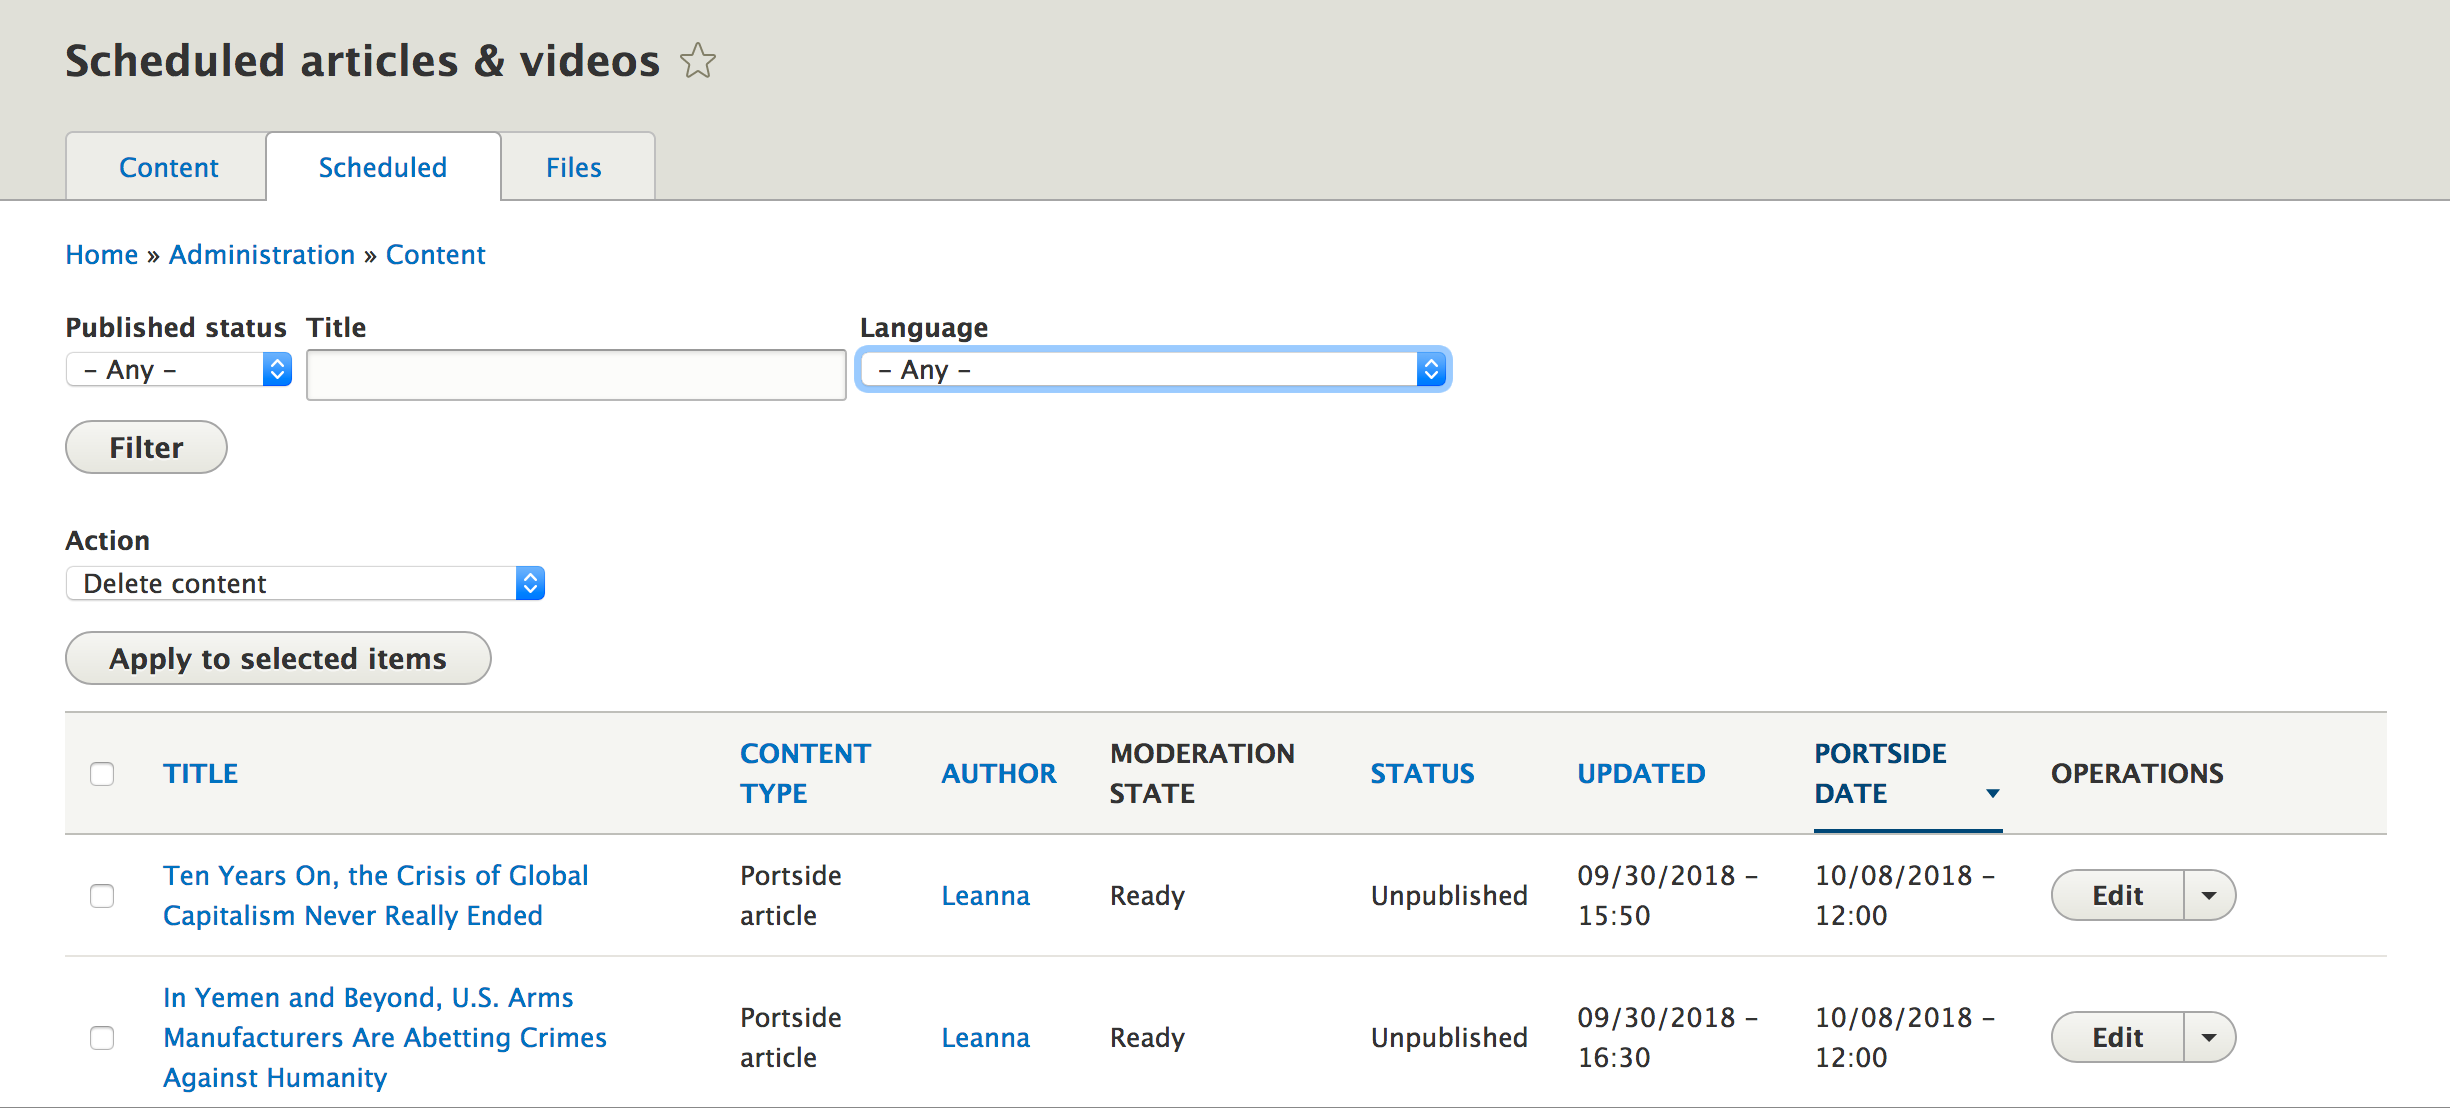 Screenshot of the scheduled content page